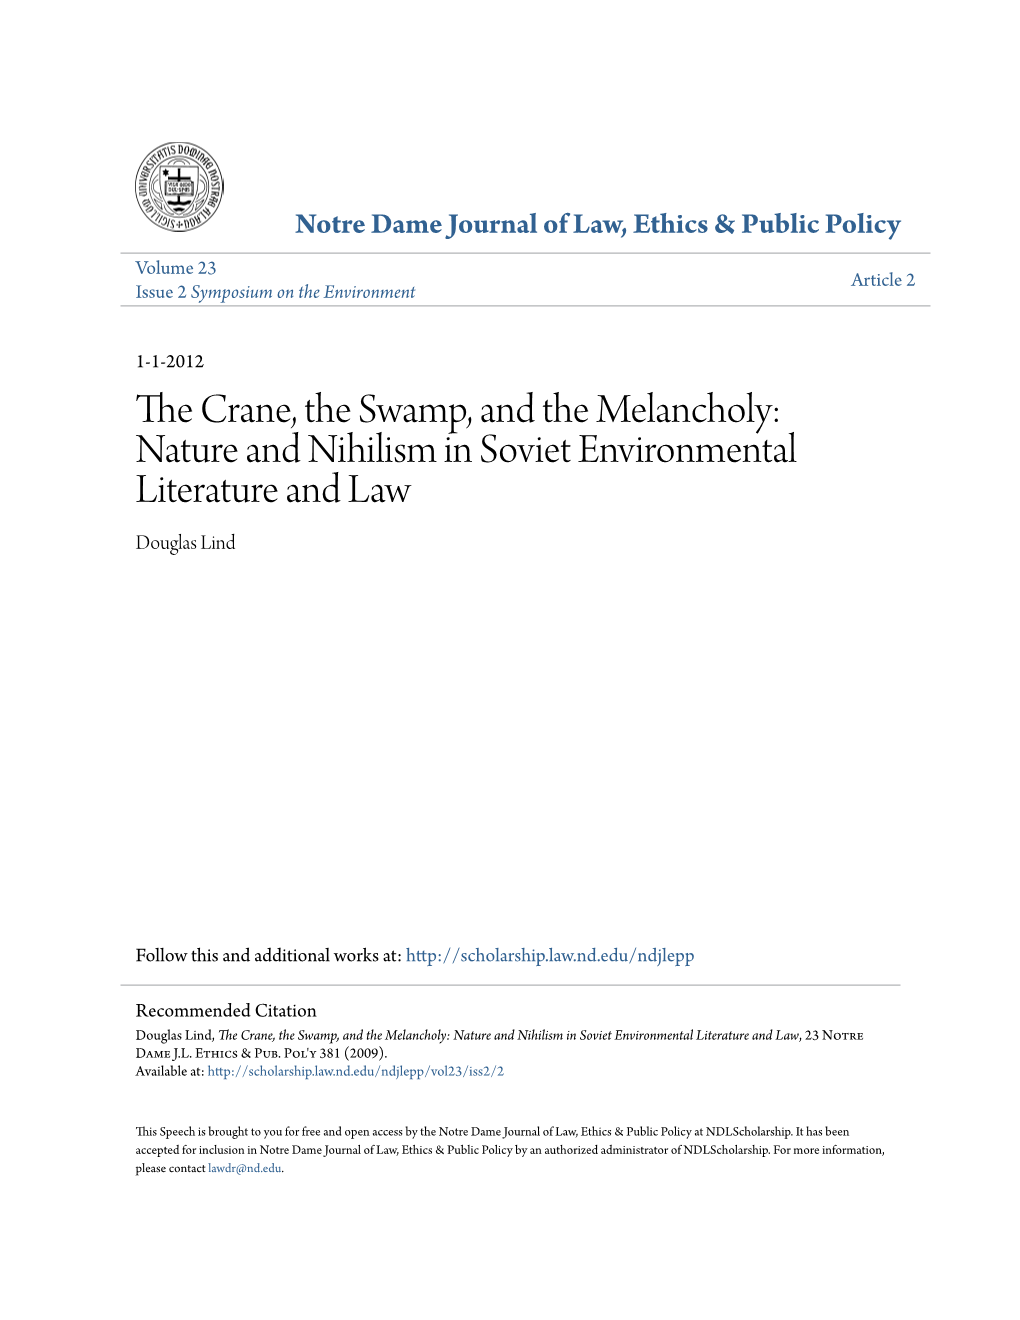 Nature and Nihilism in Soviet Environmental Literature and Law Douglas Lind